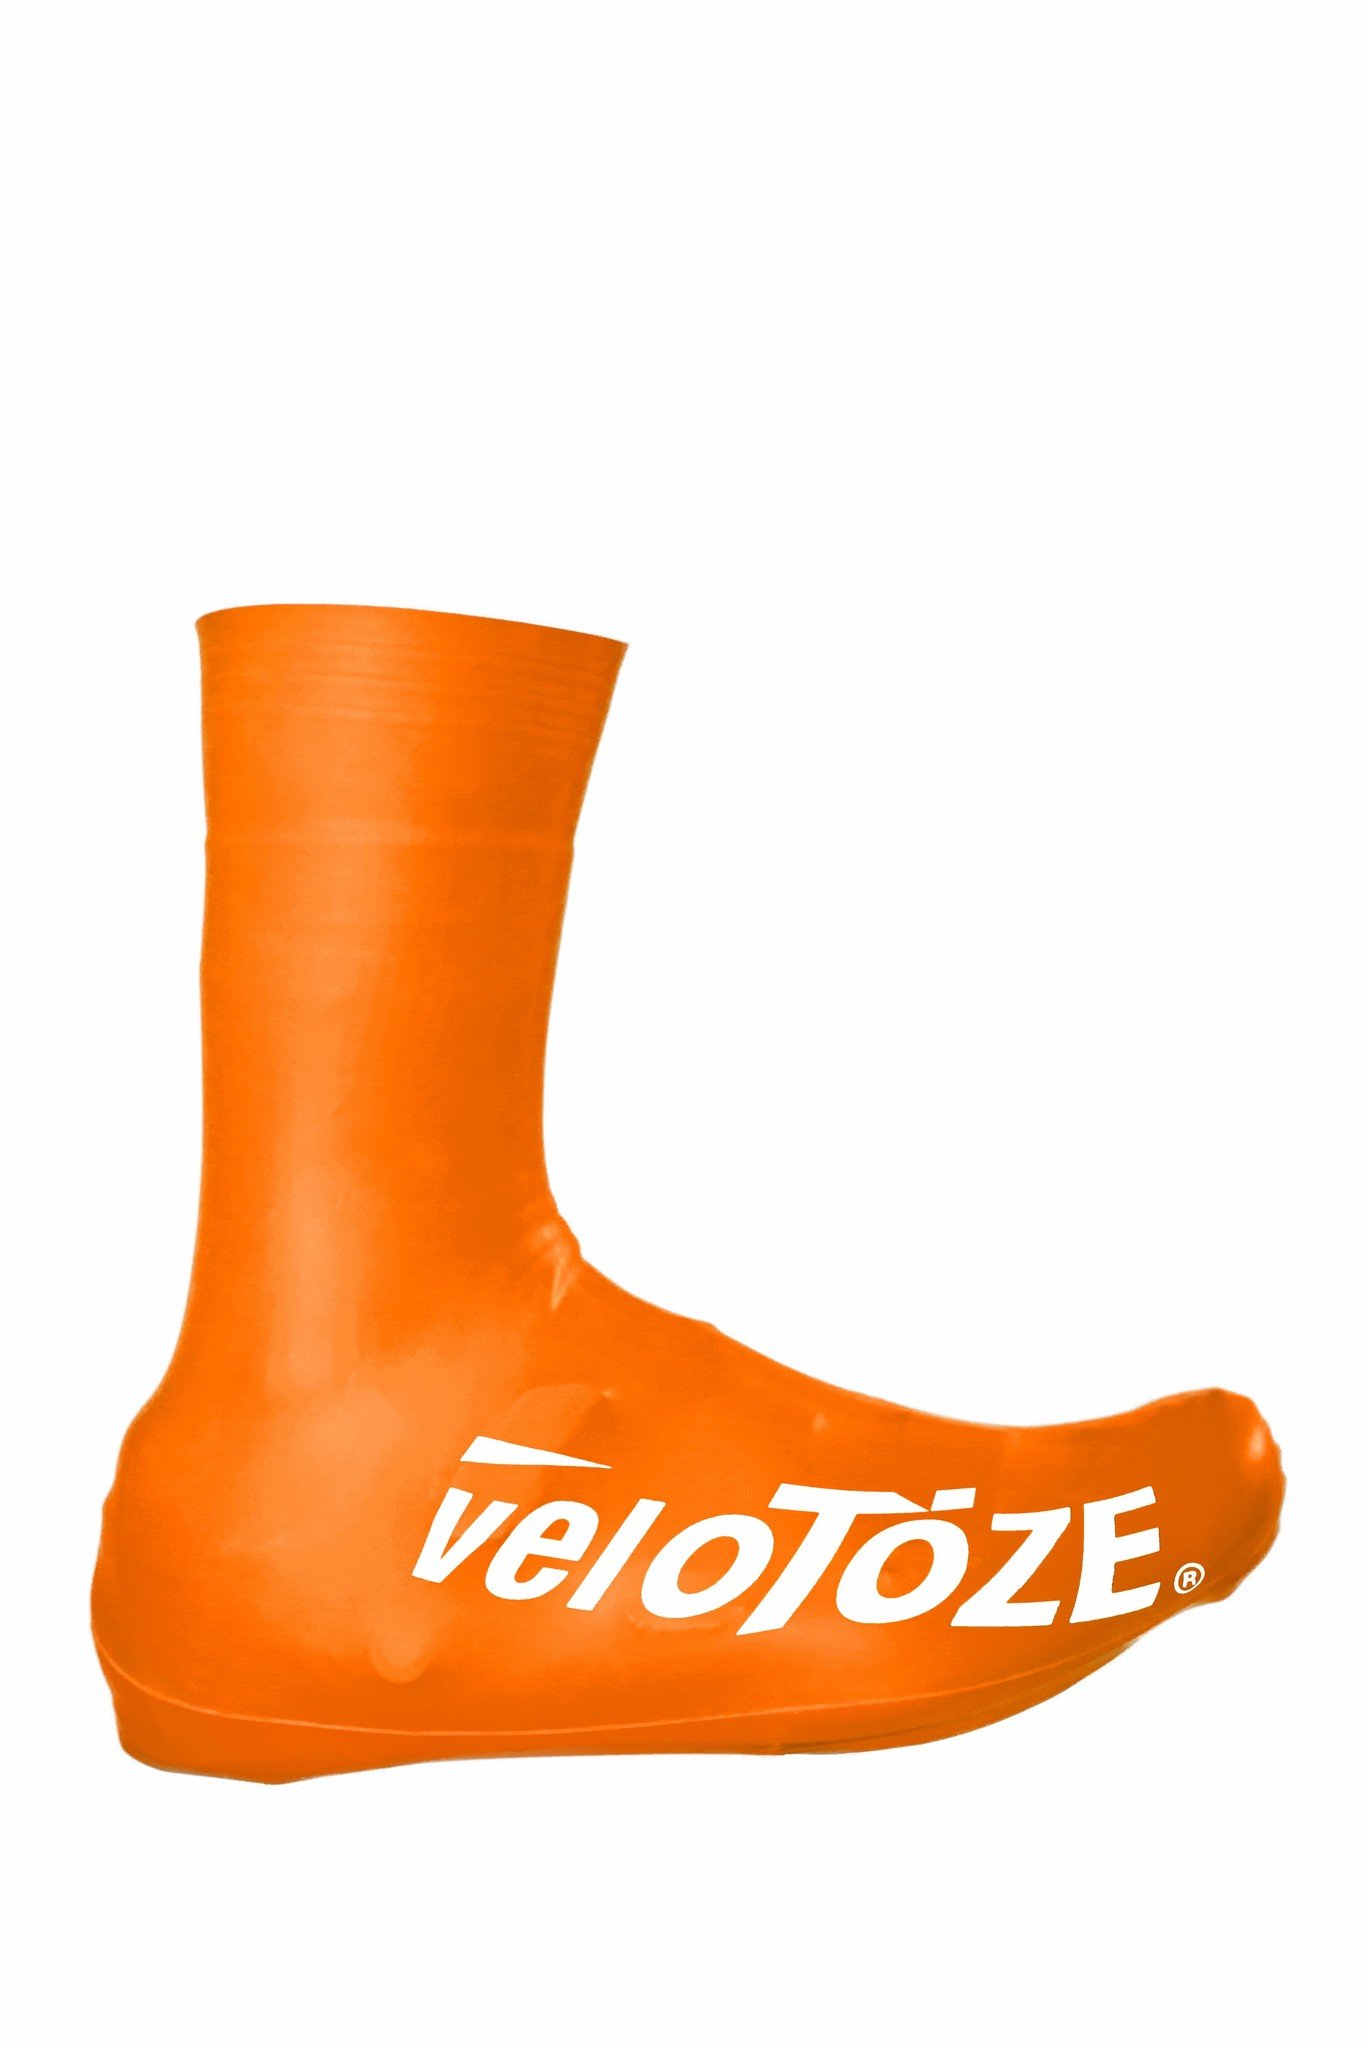 waterproof cycling overshoes for trainers